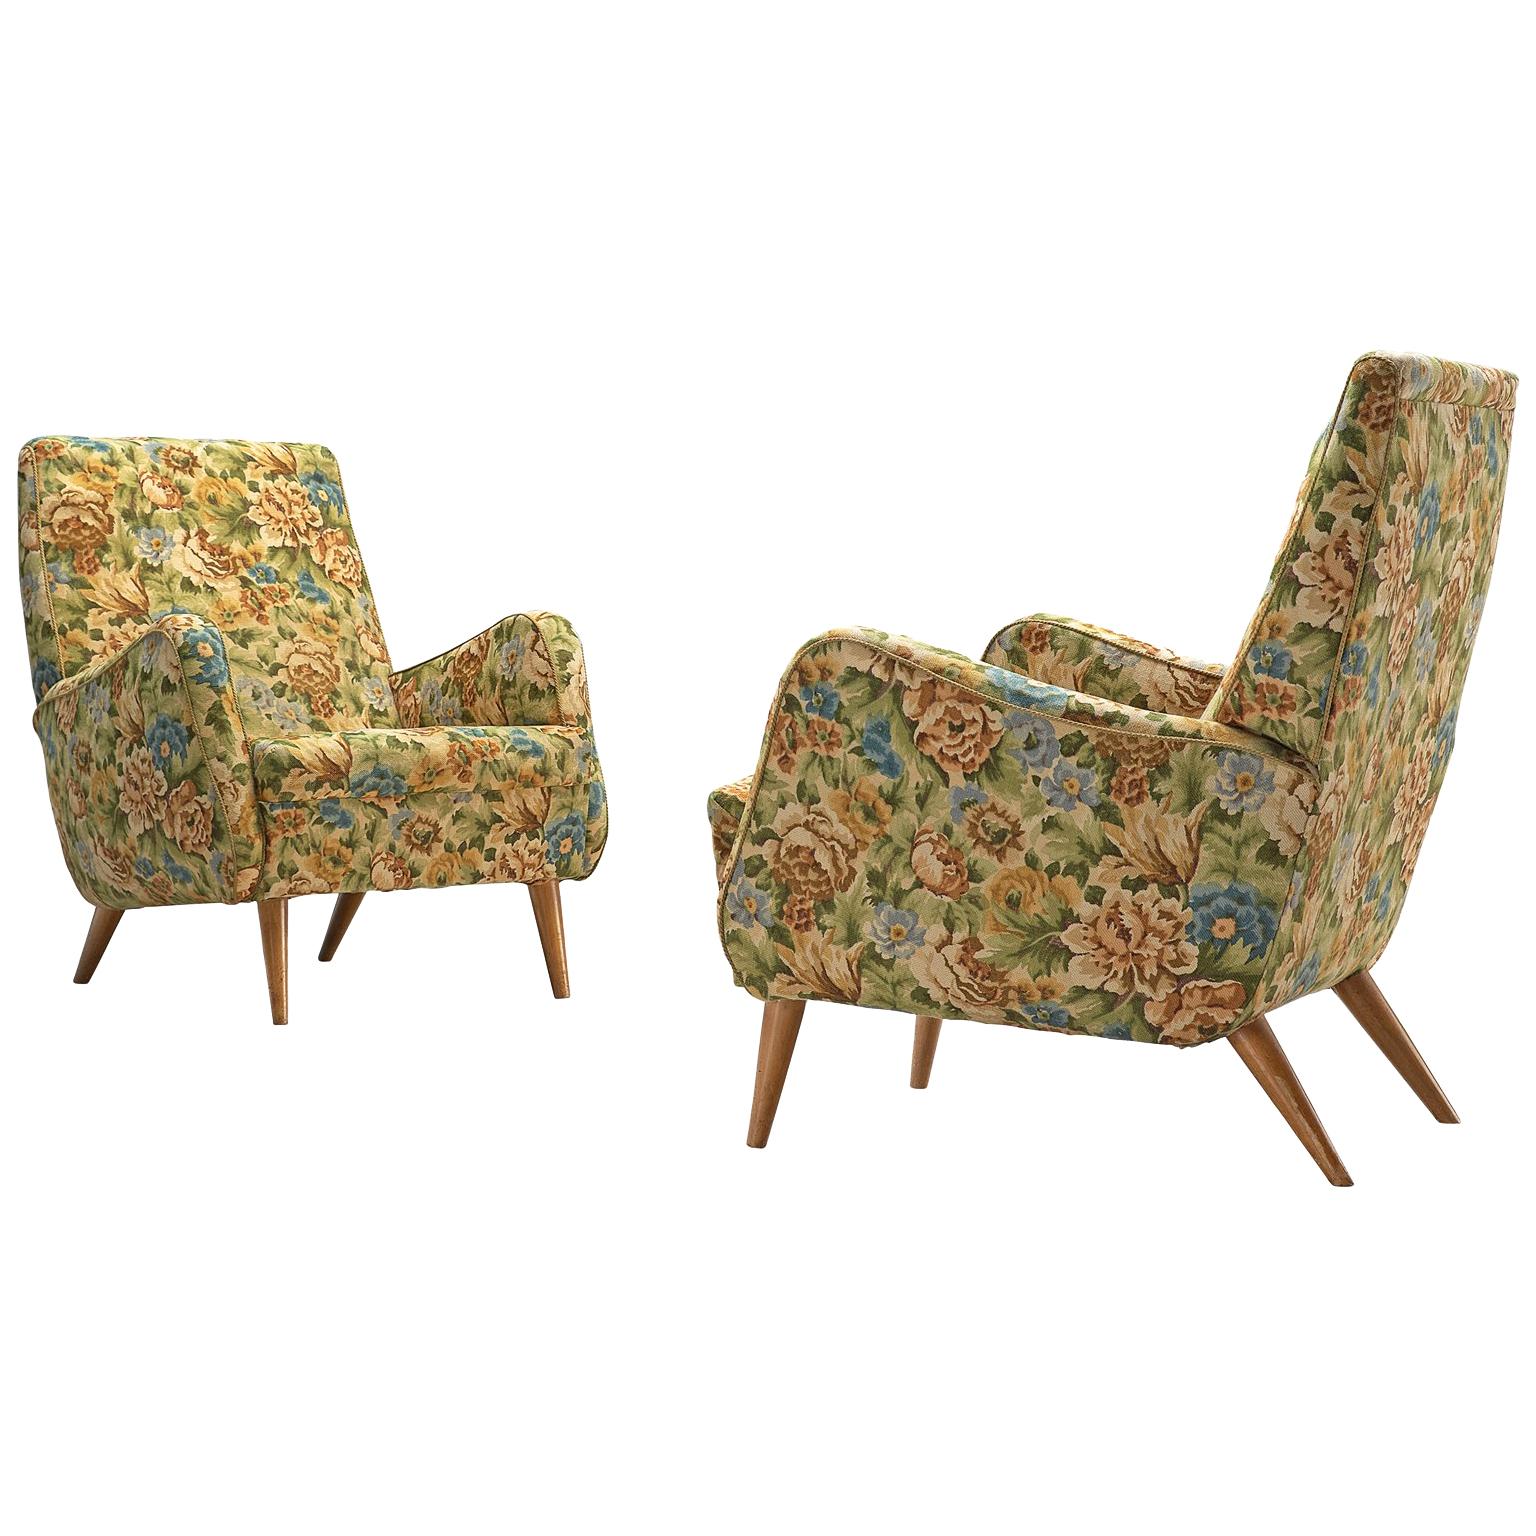 Italian Pair of Lounge Chairs in Original Floral Upholstery